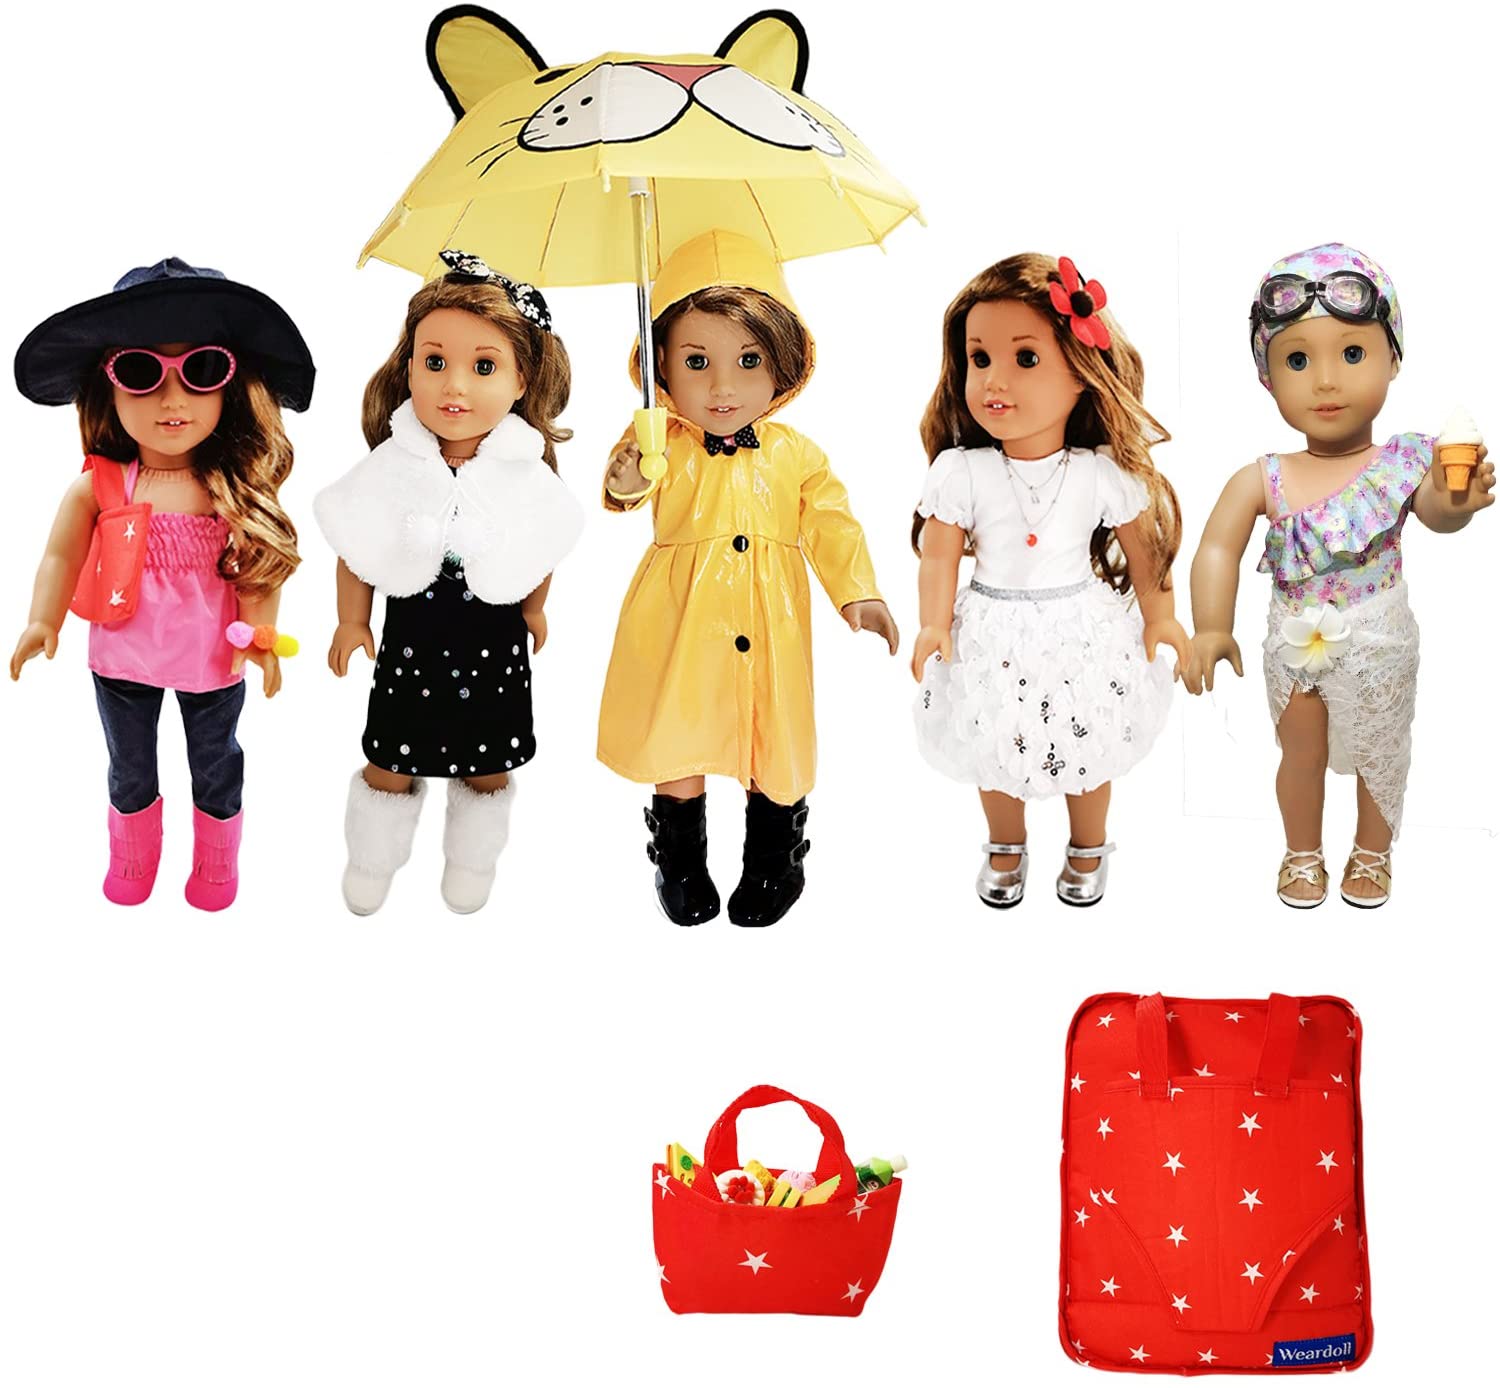 Weardoll Mix And Match American Girl Doll Clothes 18 Inch